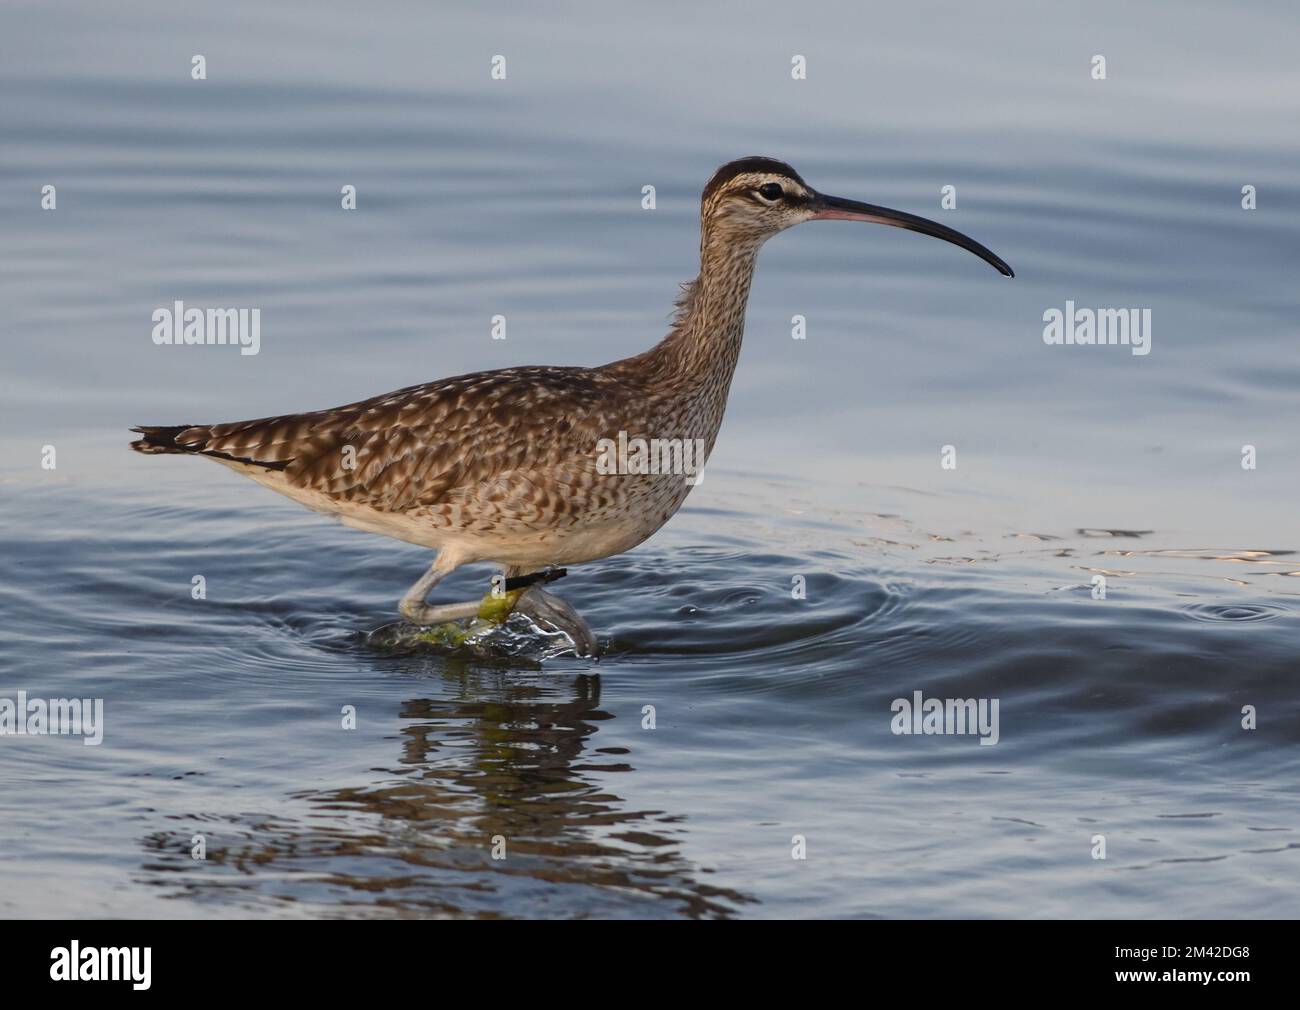 A hudsonian whimbrel (Numenius hudsonicus) searching for invertebrates in the shallow sea off the beach close to Paracas. Paracas, Peru. Stock Photo